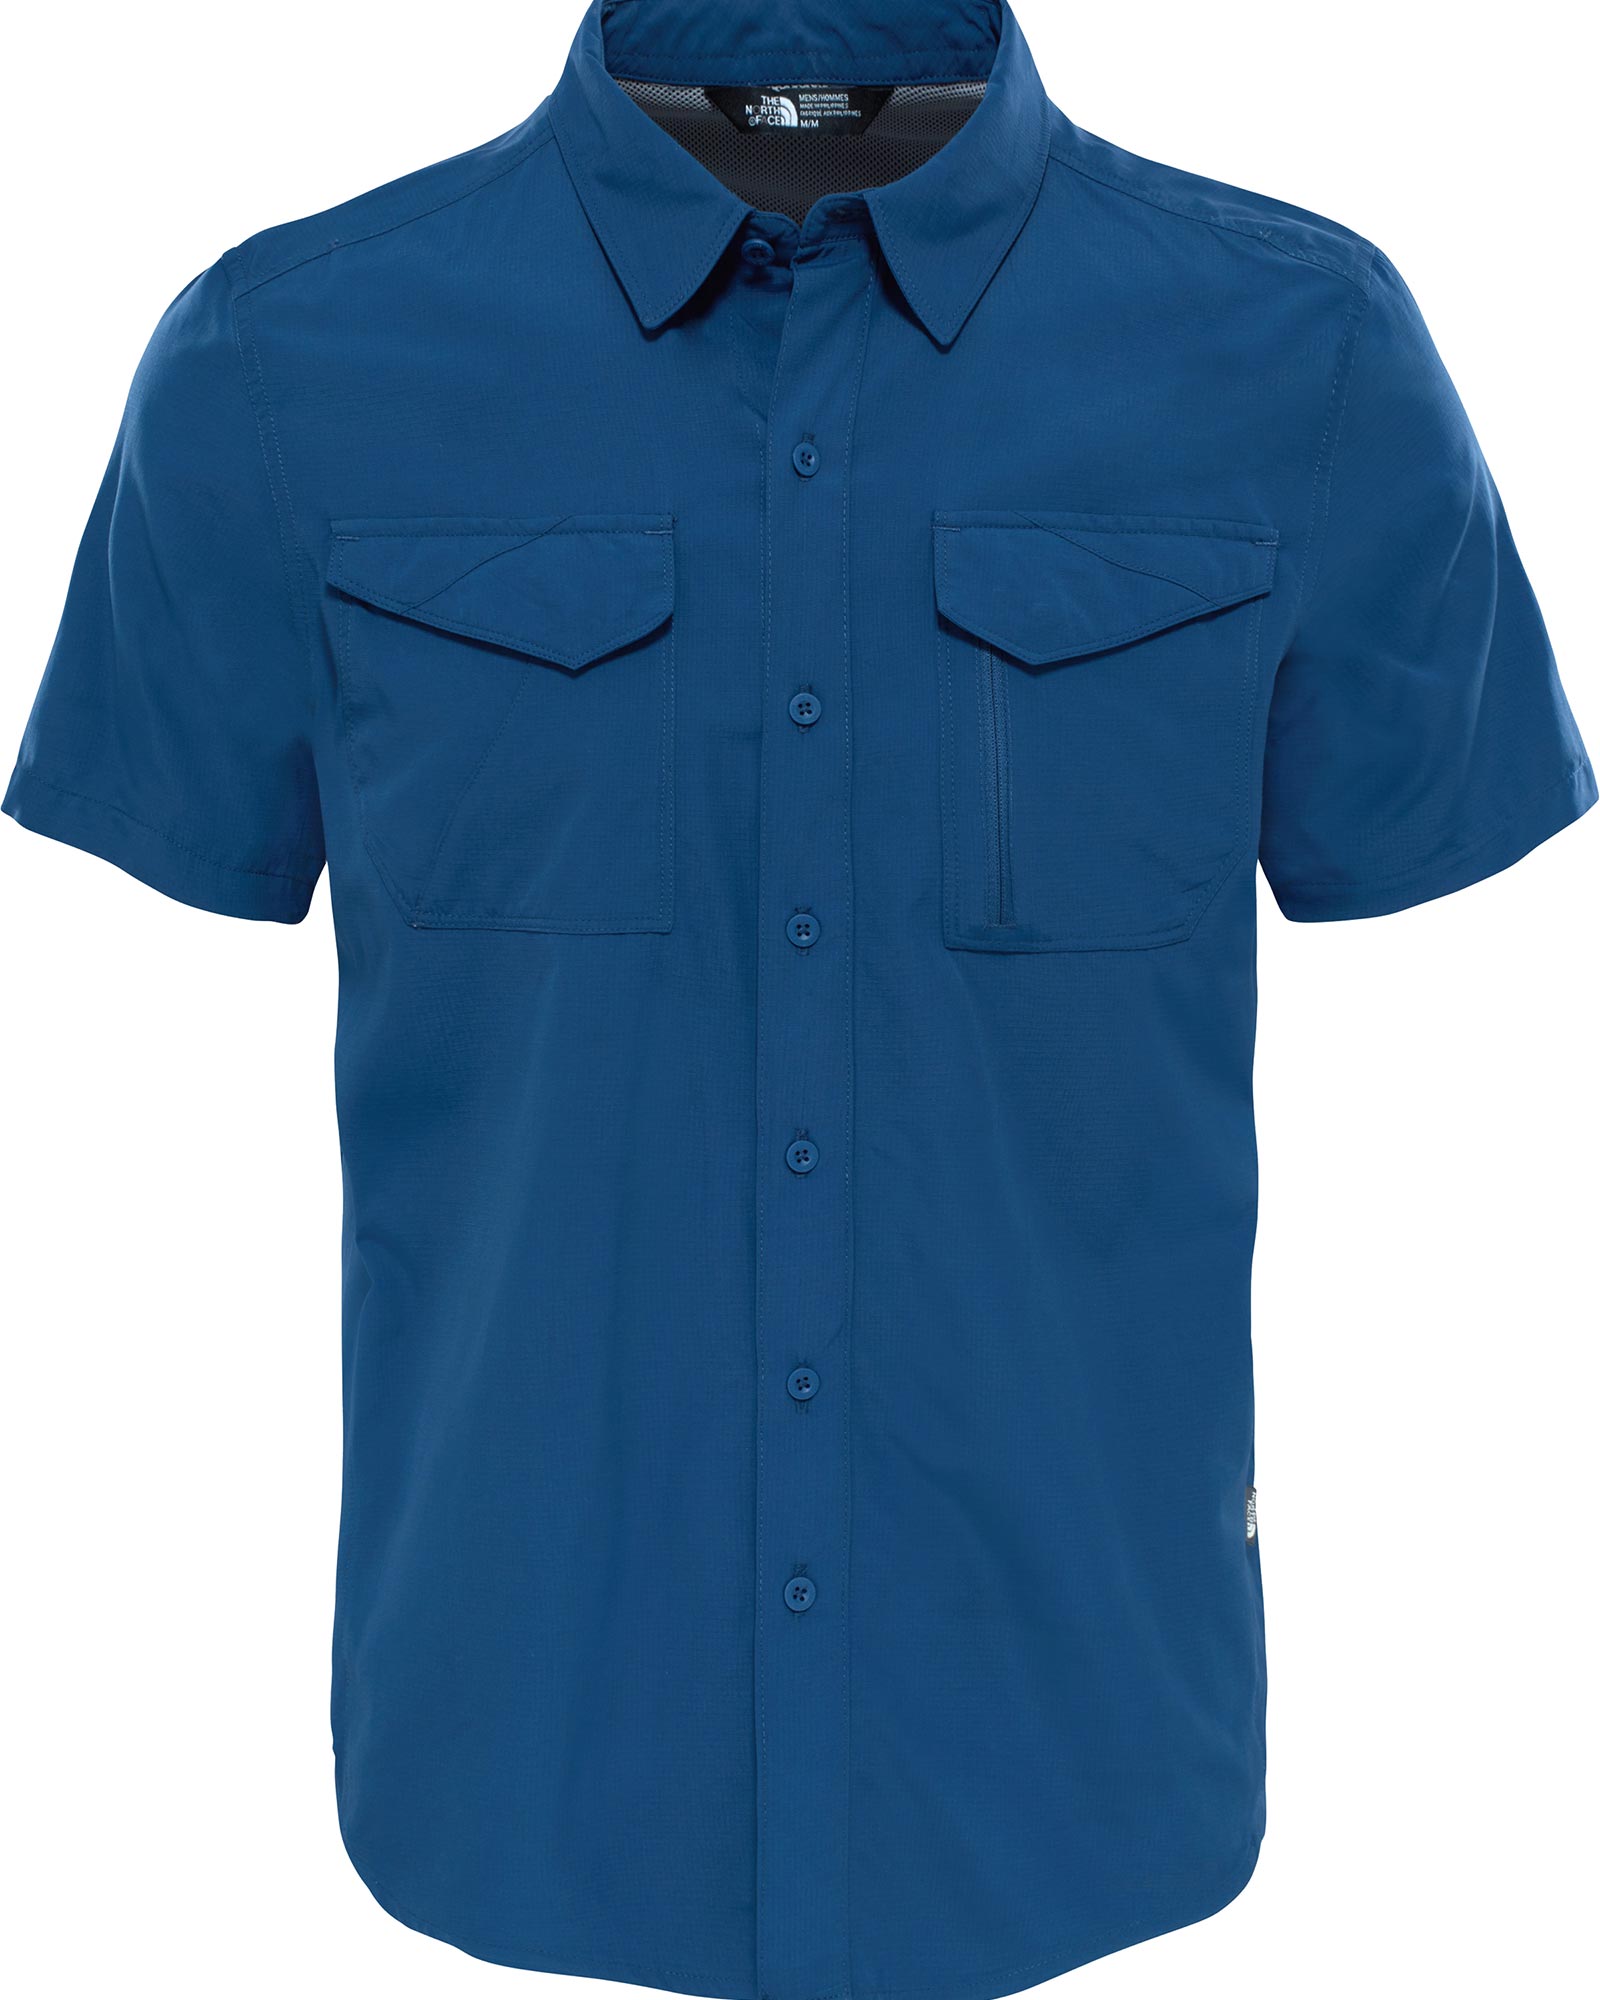 The North Face Sequoia Men’s Shirt - Shady Blue S